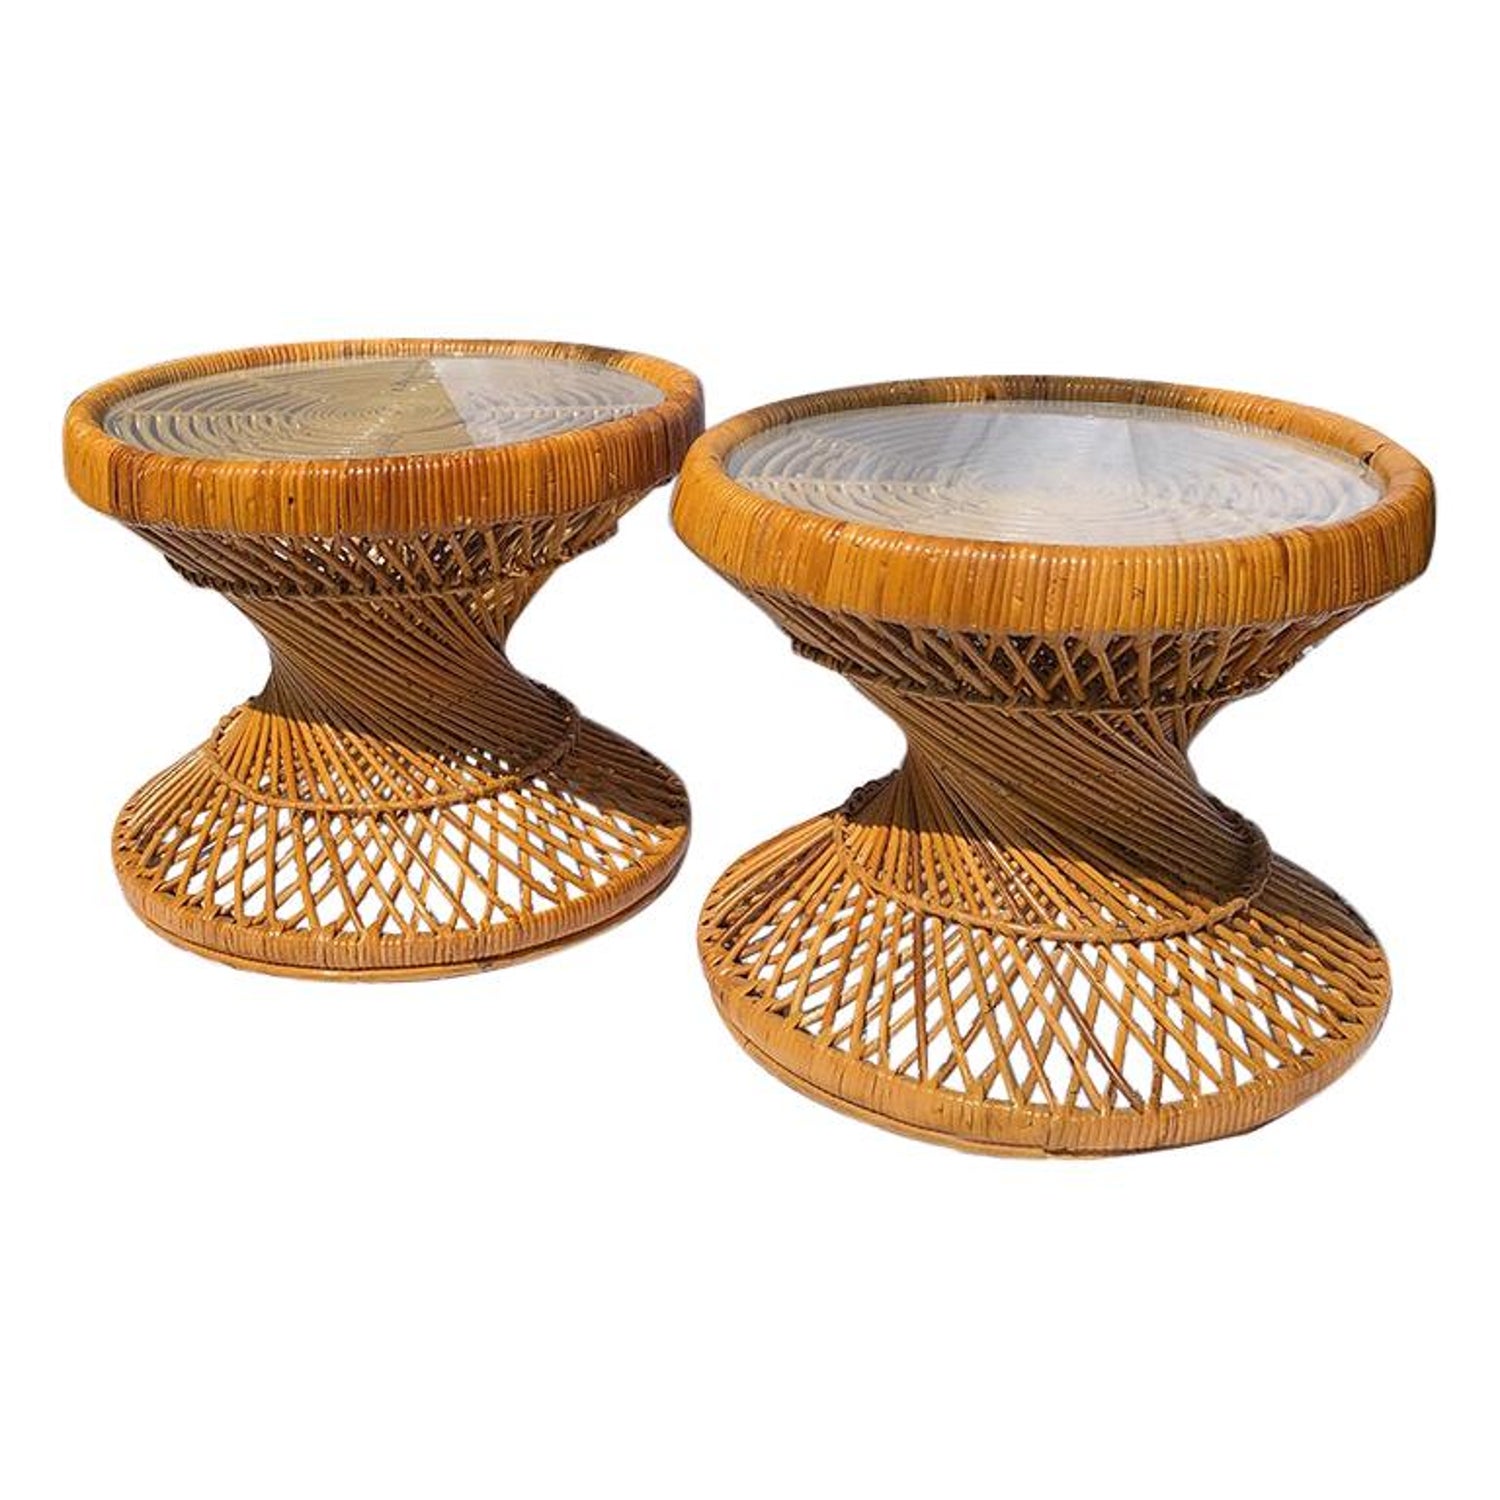 Rattan Wicker Wrapped Round Side Tables, Wicker Side Table With Glass Top